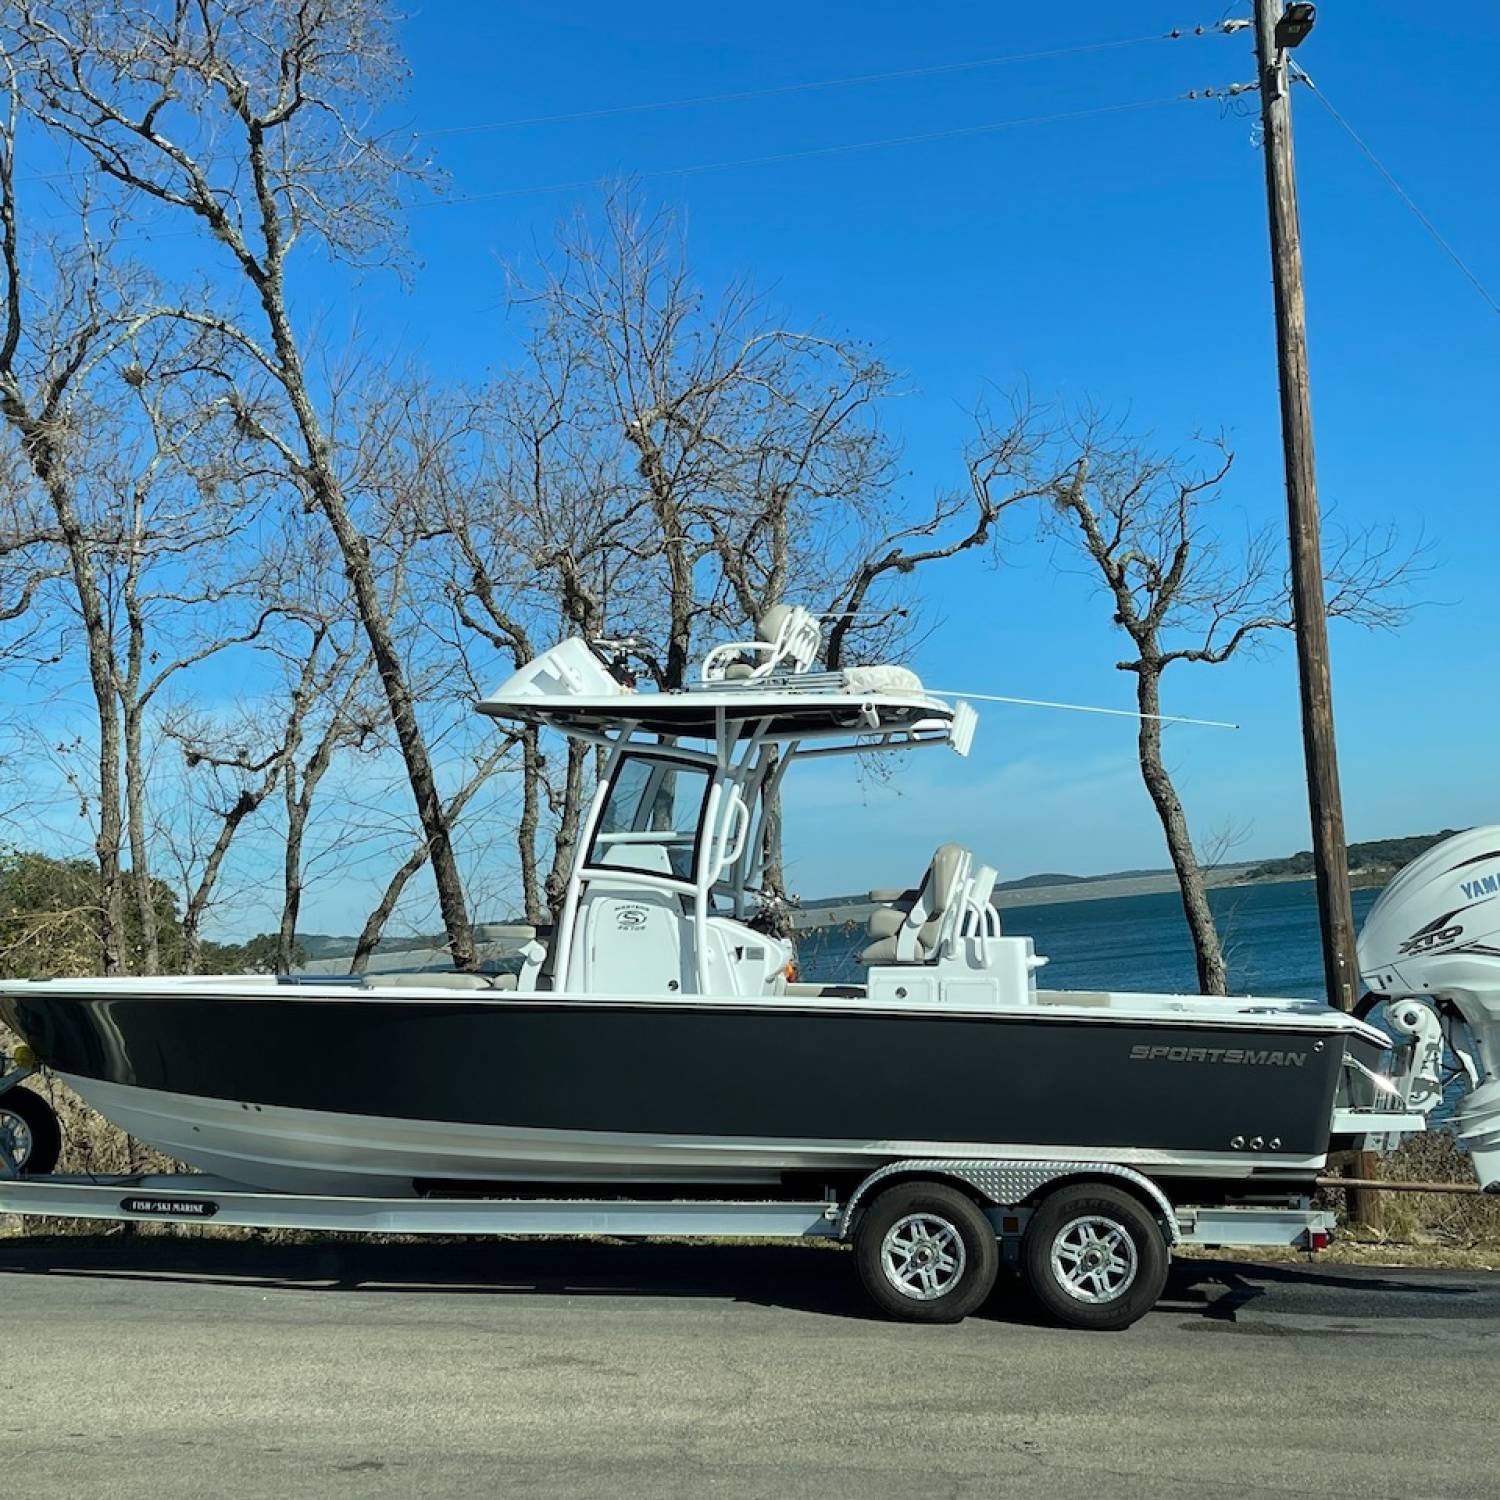 Title: Fun day on the lake - On board their Sportsman Masters 267OE Bay Boat - Location: Canyon Lake, TX. Participating in the Photo Contest #SportsmanApril